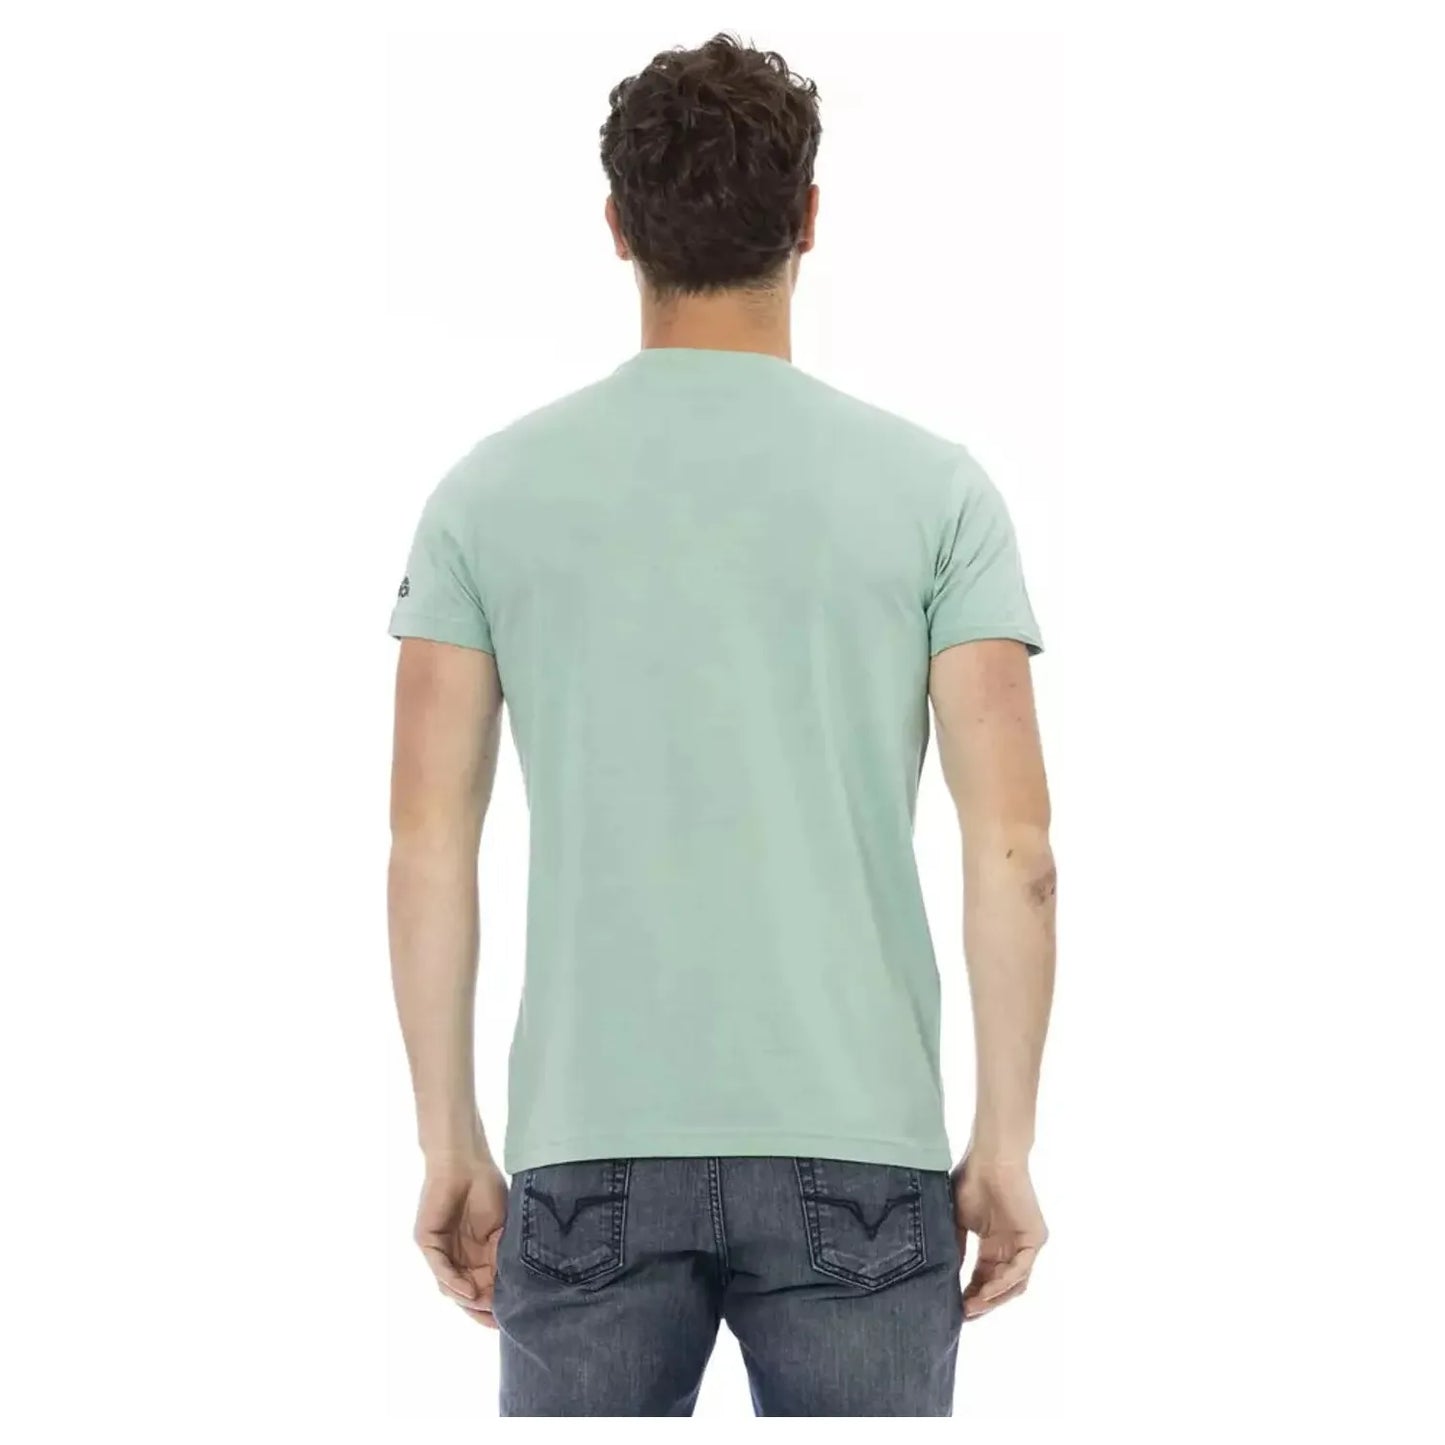 Trussardi Action Casual Chic Green Tee with Graphic Appeal green-cotton-t-shirt-53 product-22800-1566916209-23-79577e3b-388.webp